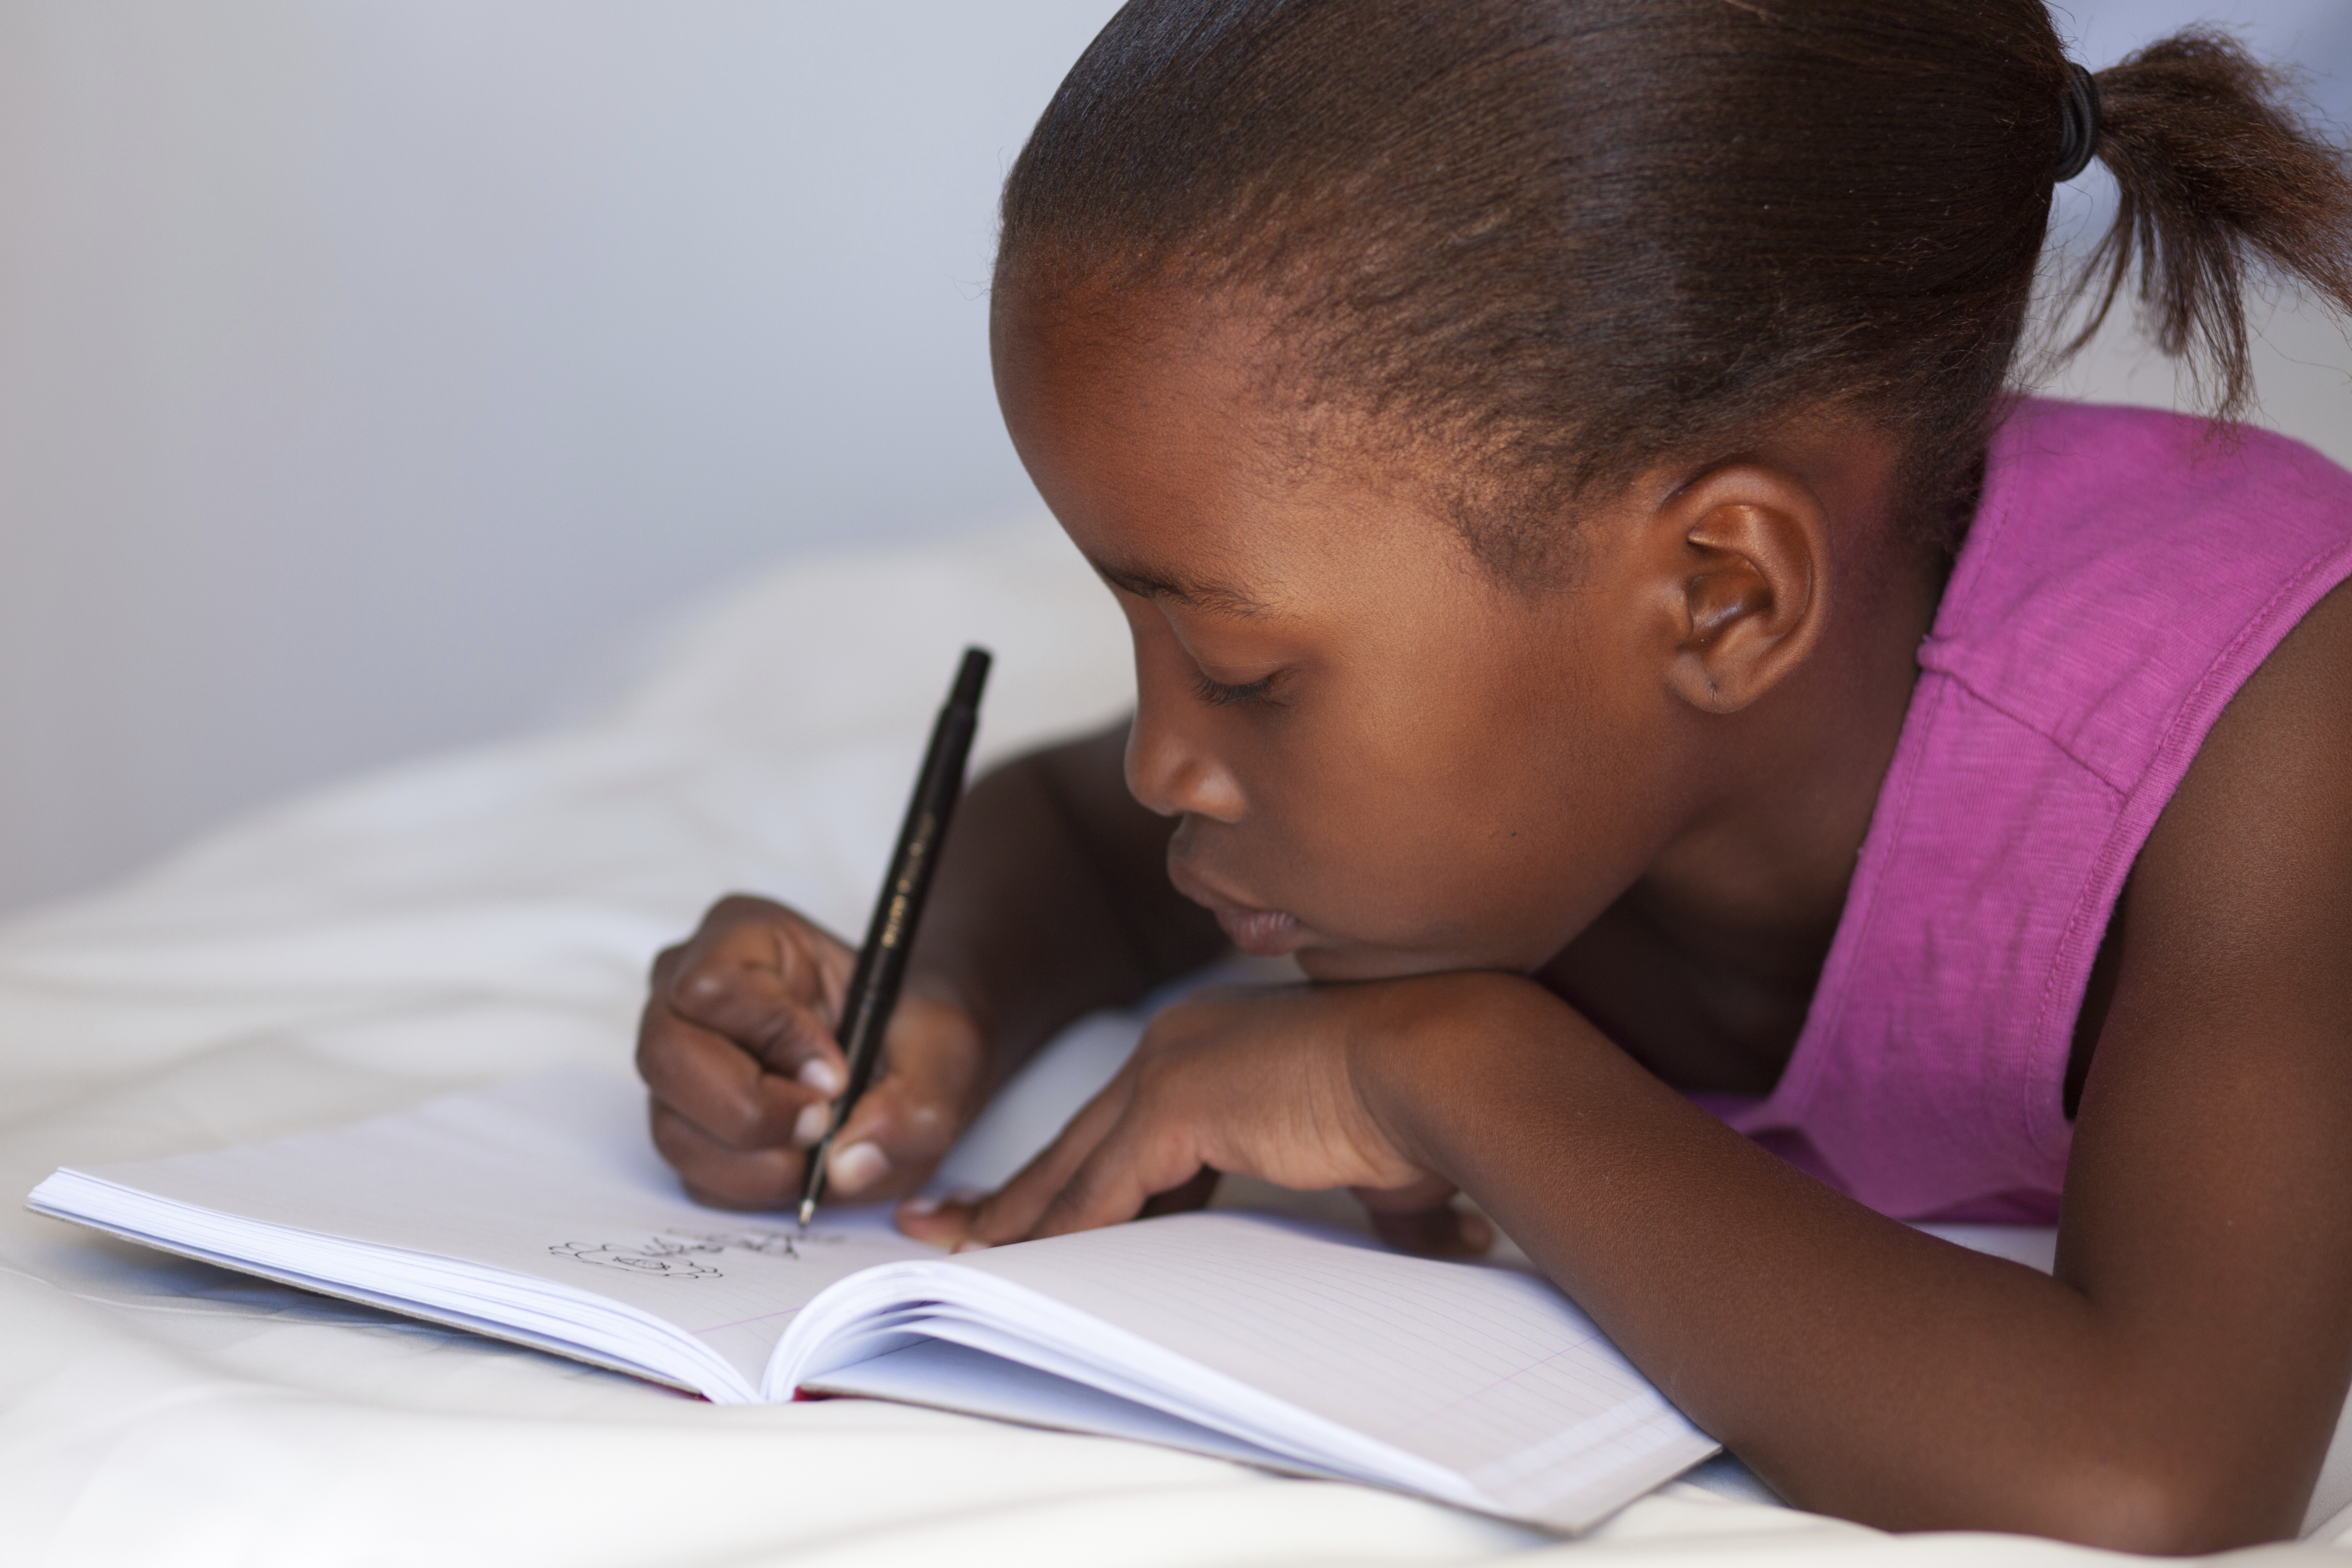 4 Great Note-Taking Strategies to Support Your Child’s Learning